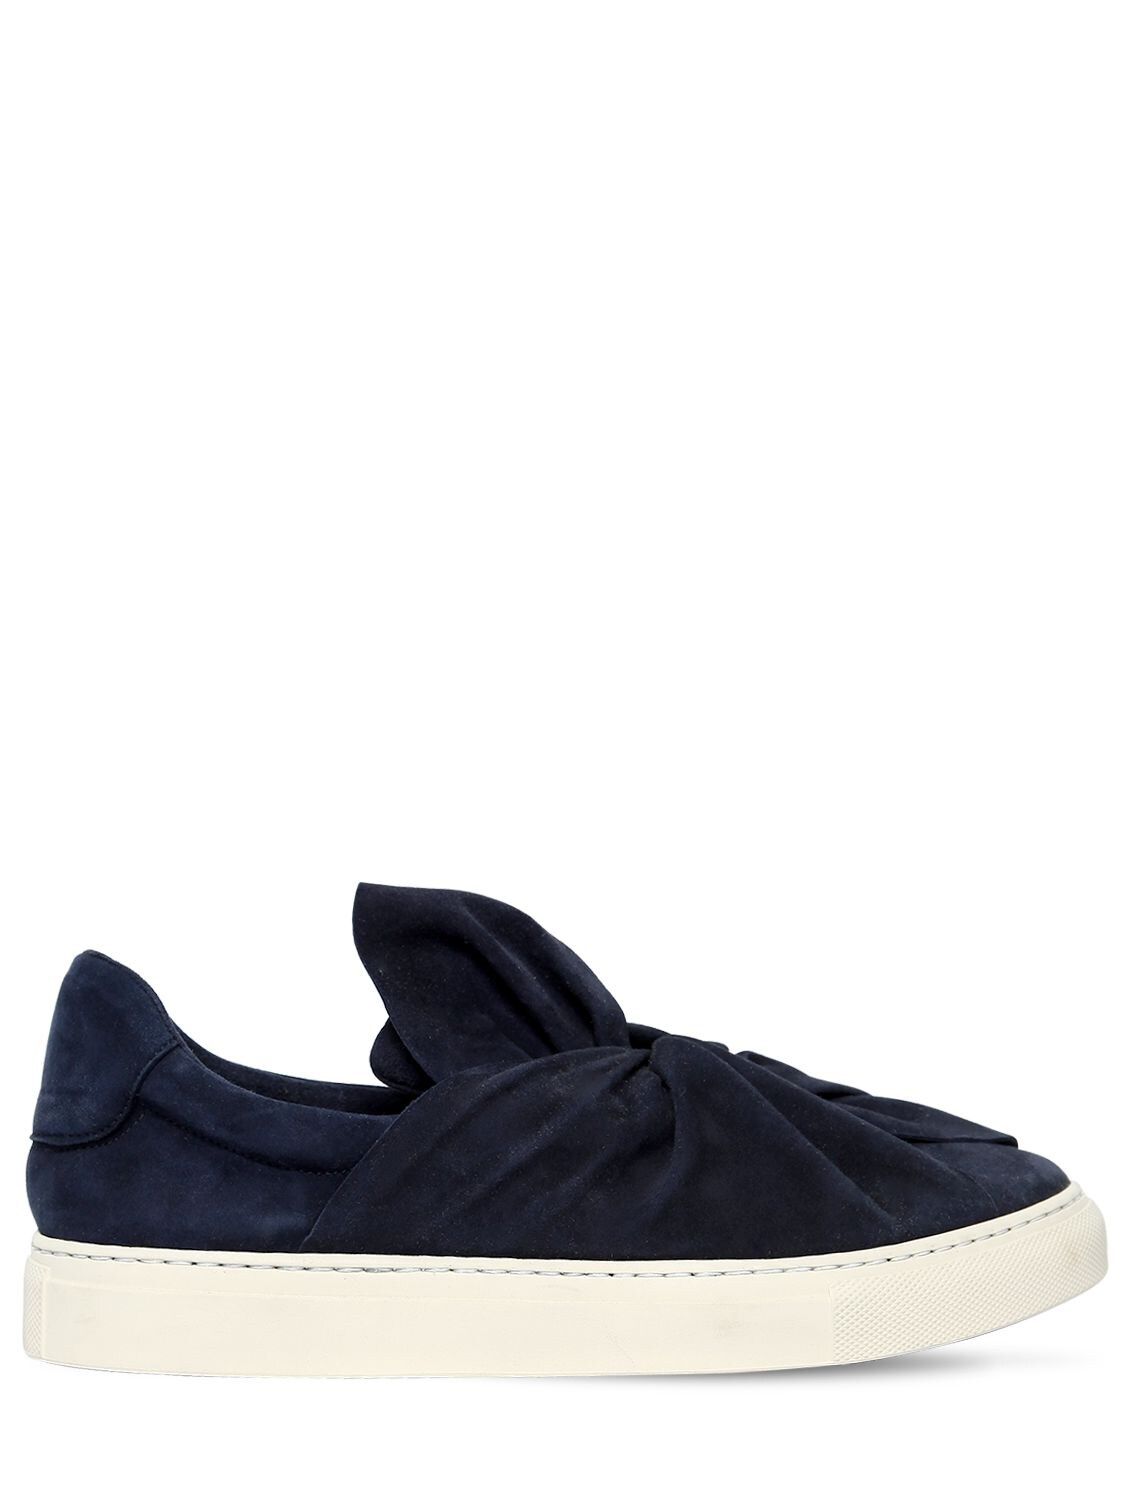 PORTS 1961 20MM KNOT SUEDE SLIP-ON SNEAKERS,66ILNQ001-ODK50